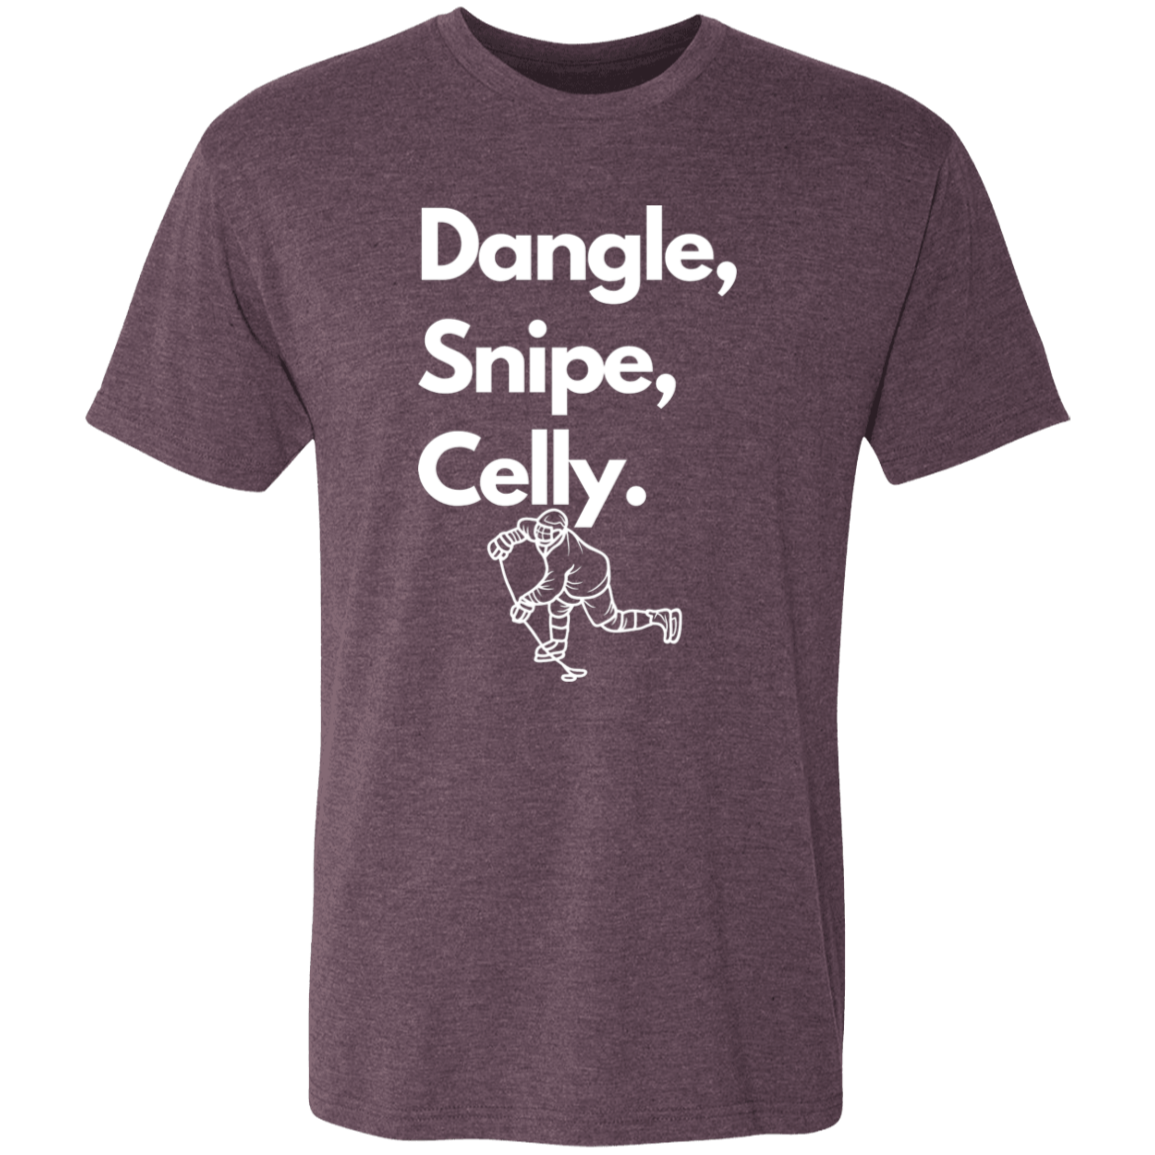 Dangle-Snipe-Celly, Men's Triblend  Hockey T-Shirt